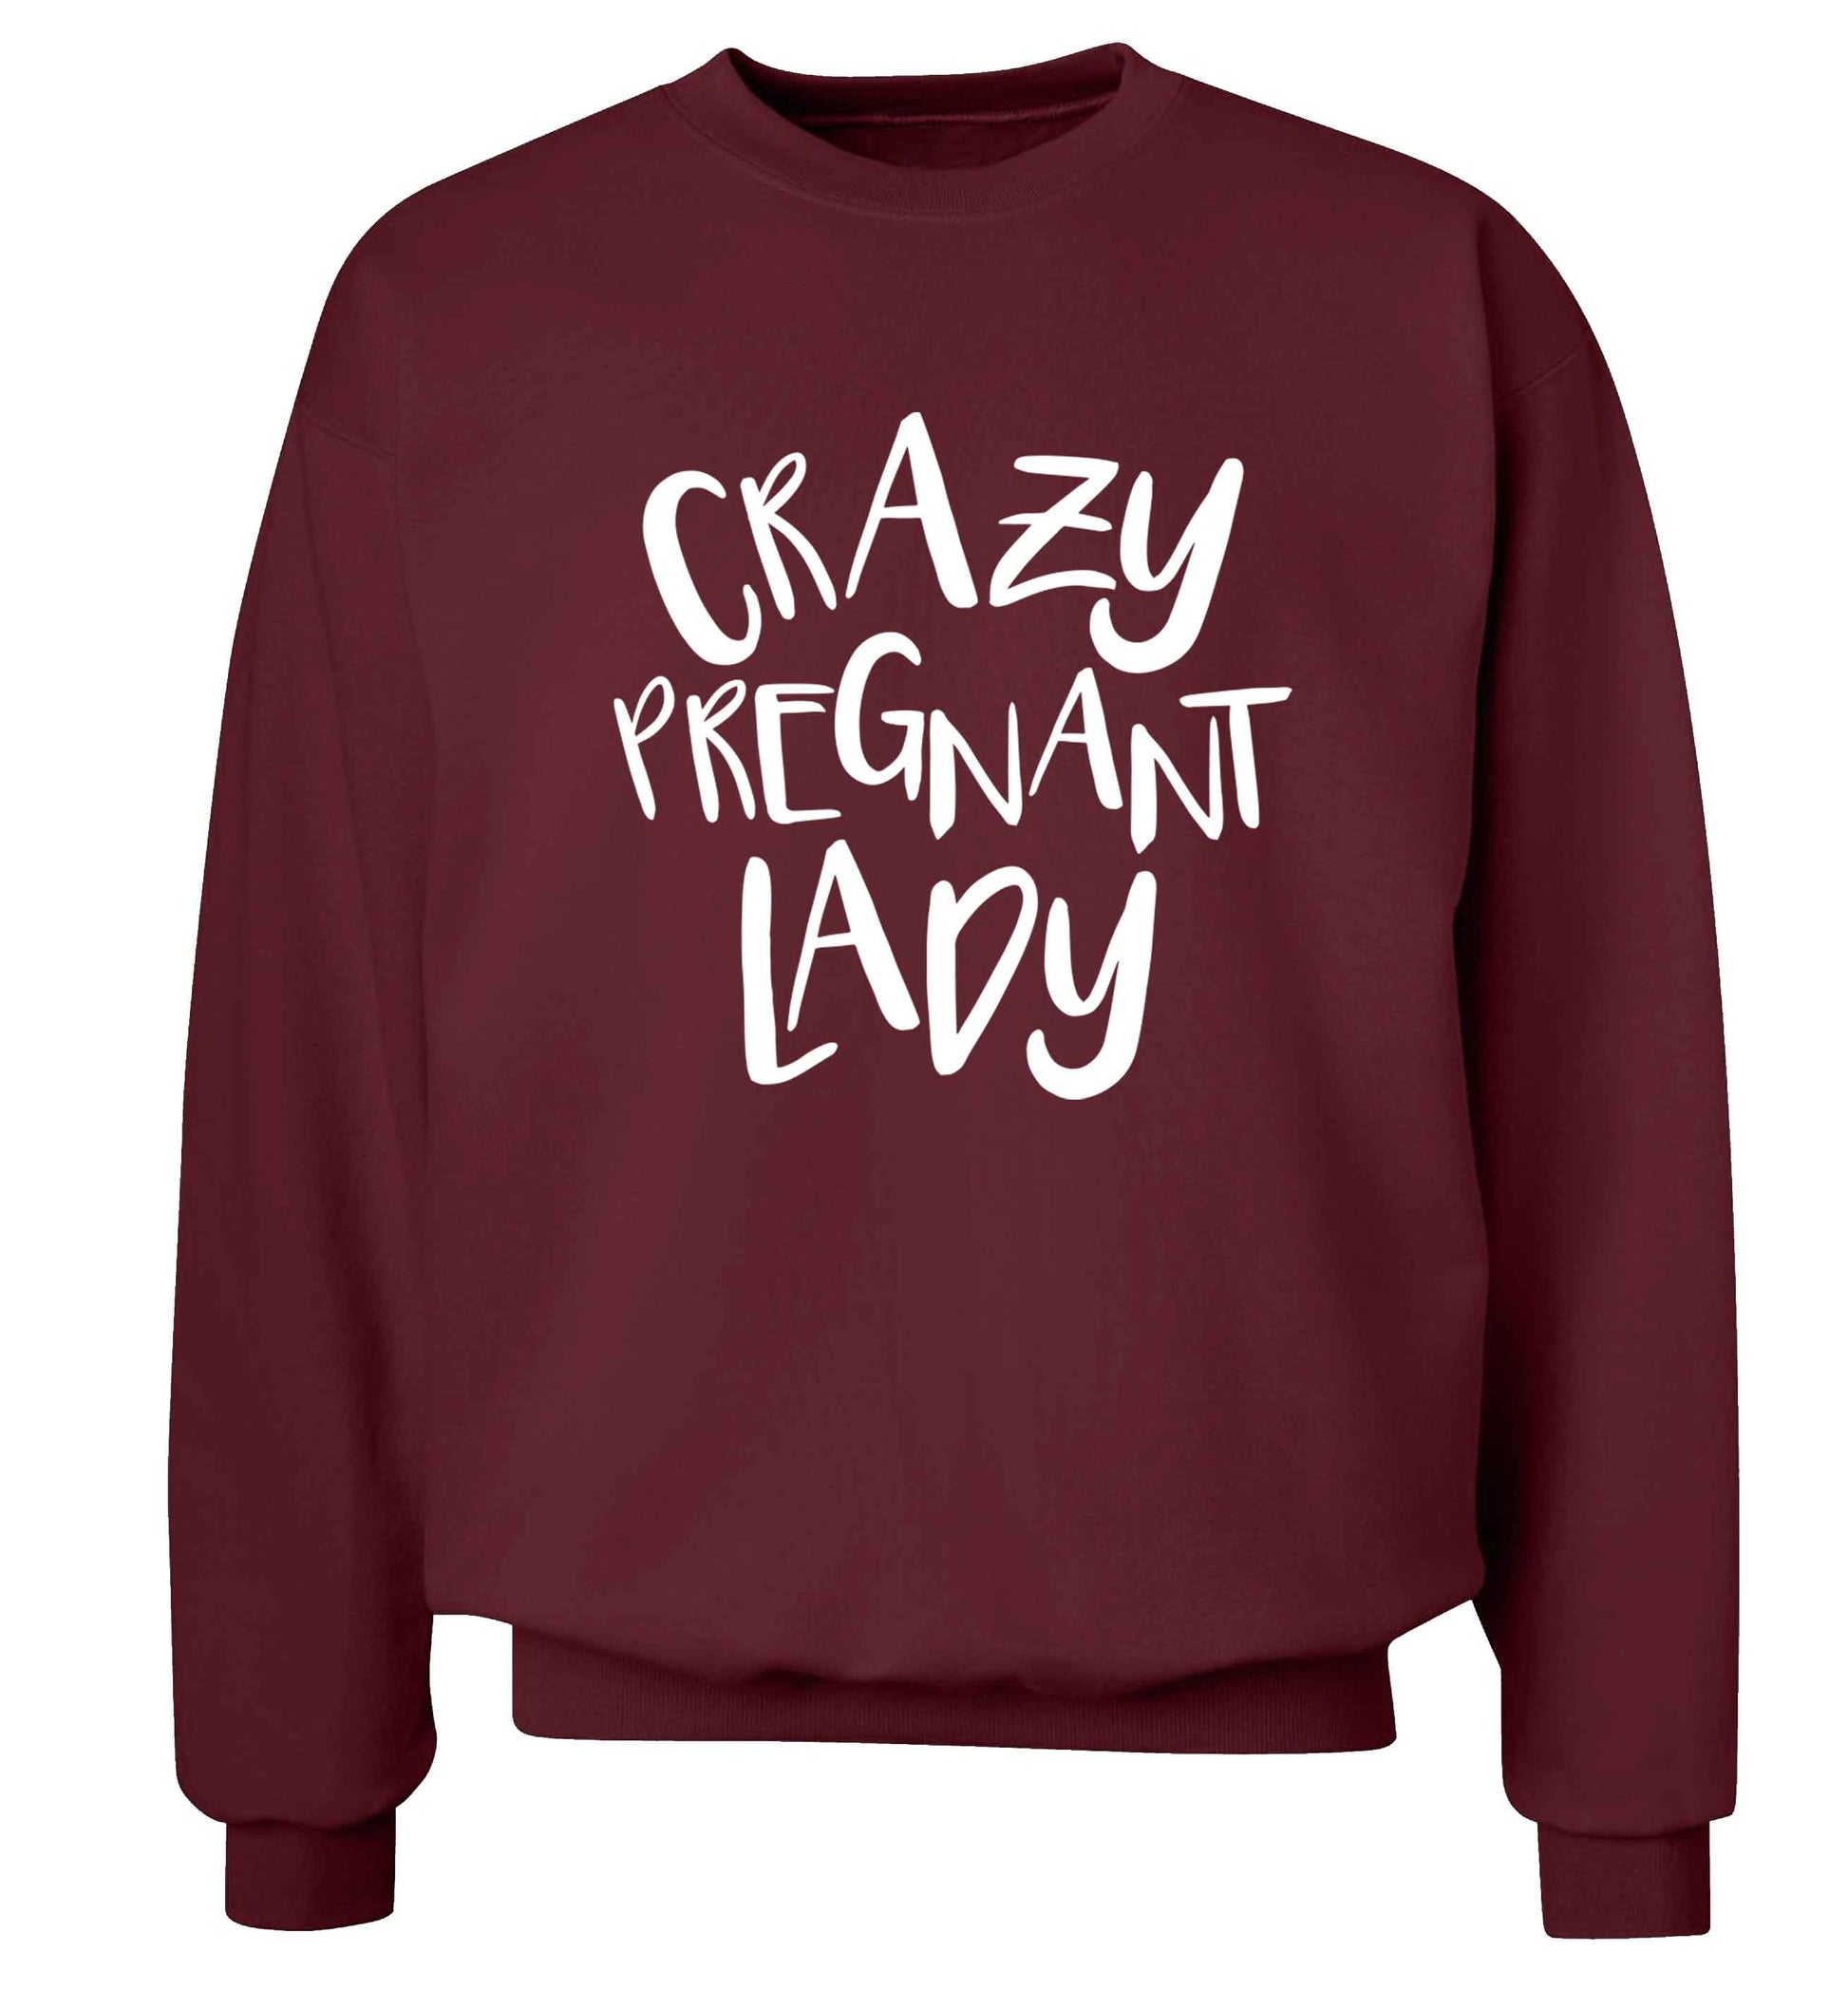 Crazy pregnant lady Adult's unisex maroon Sweater 2XL